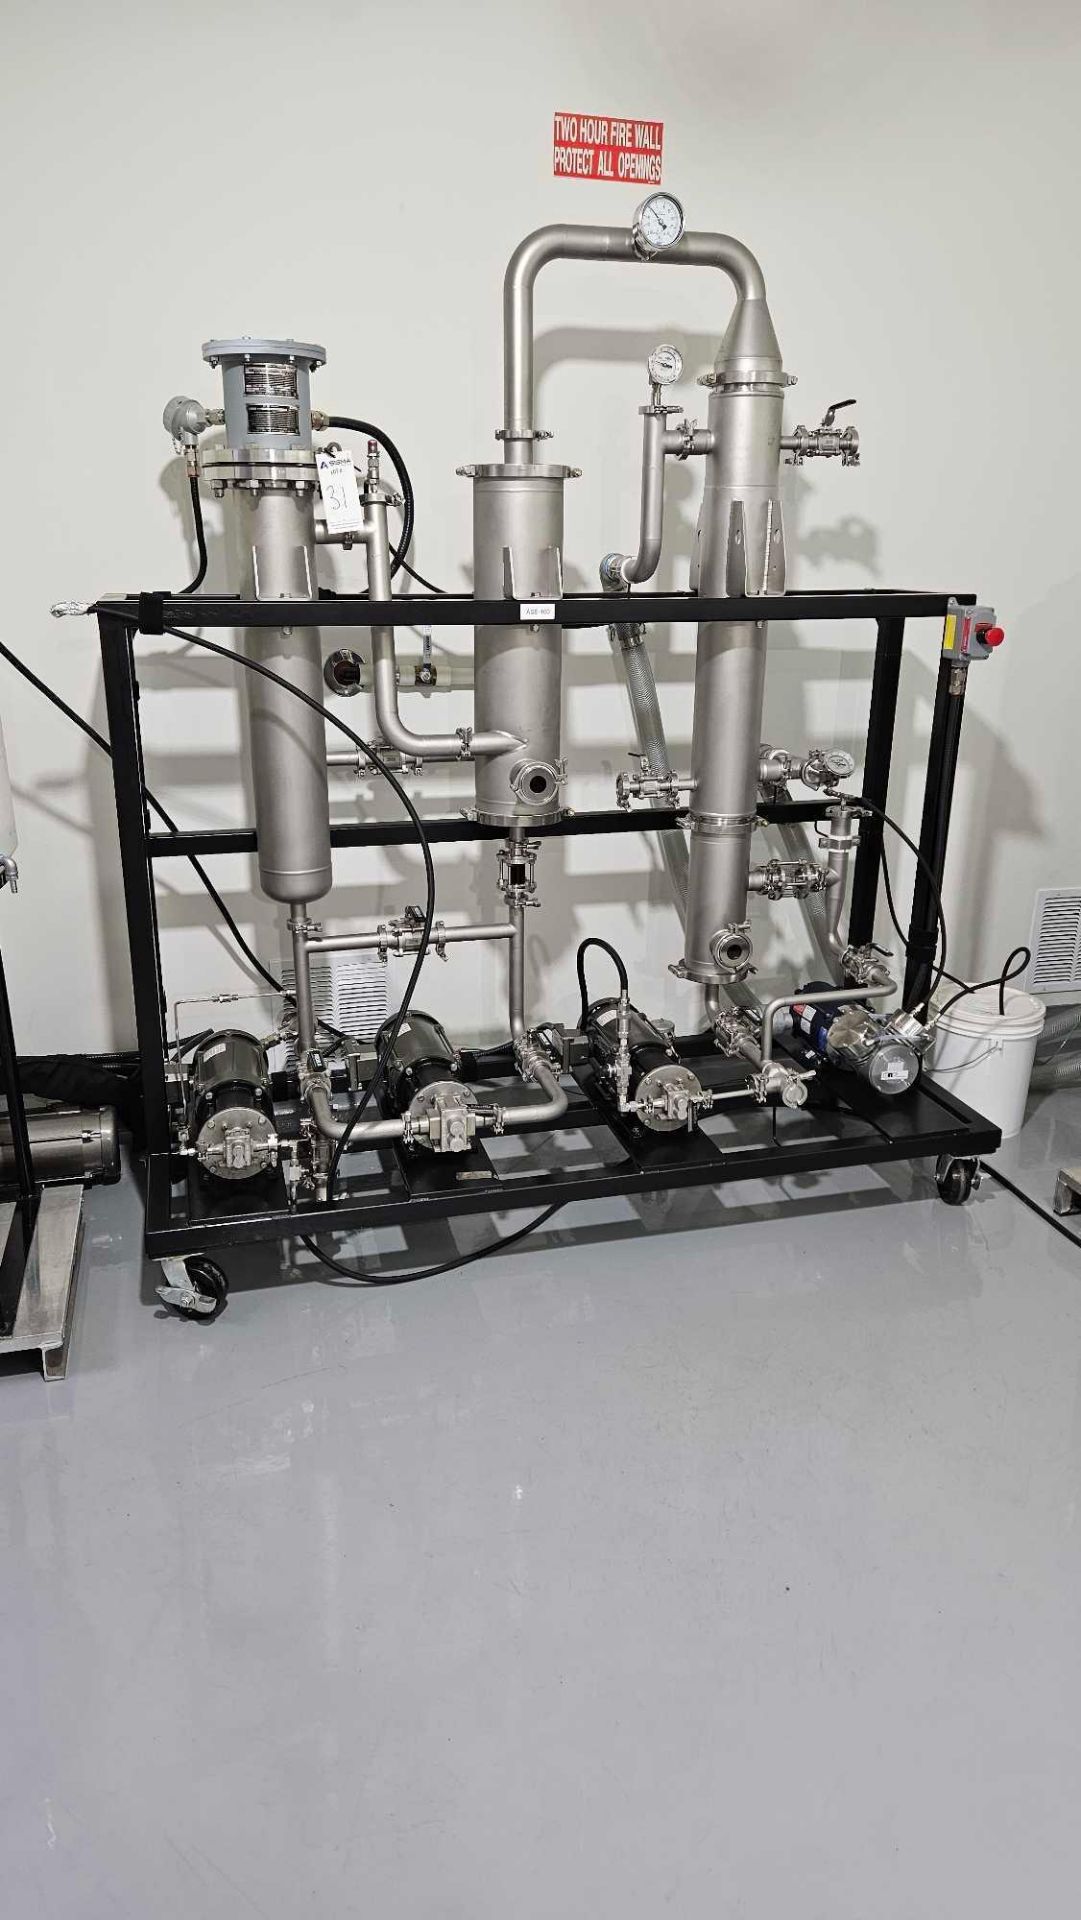 ASE-100 Precision Extraction Alcohol Recovery System - Image 8 of 14